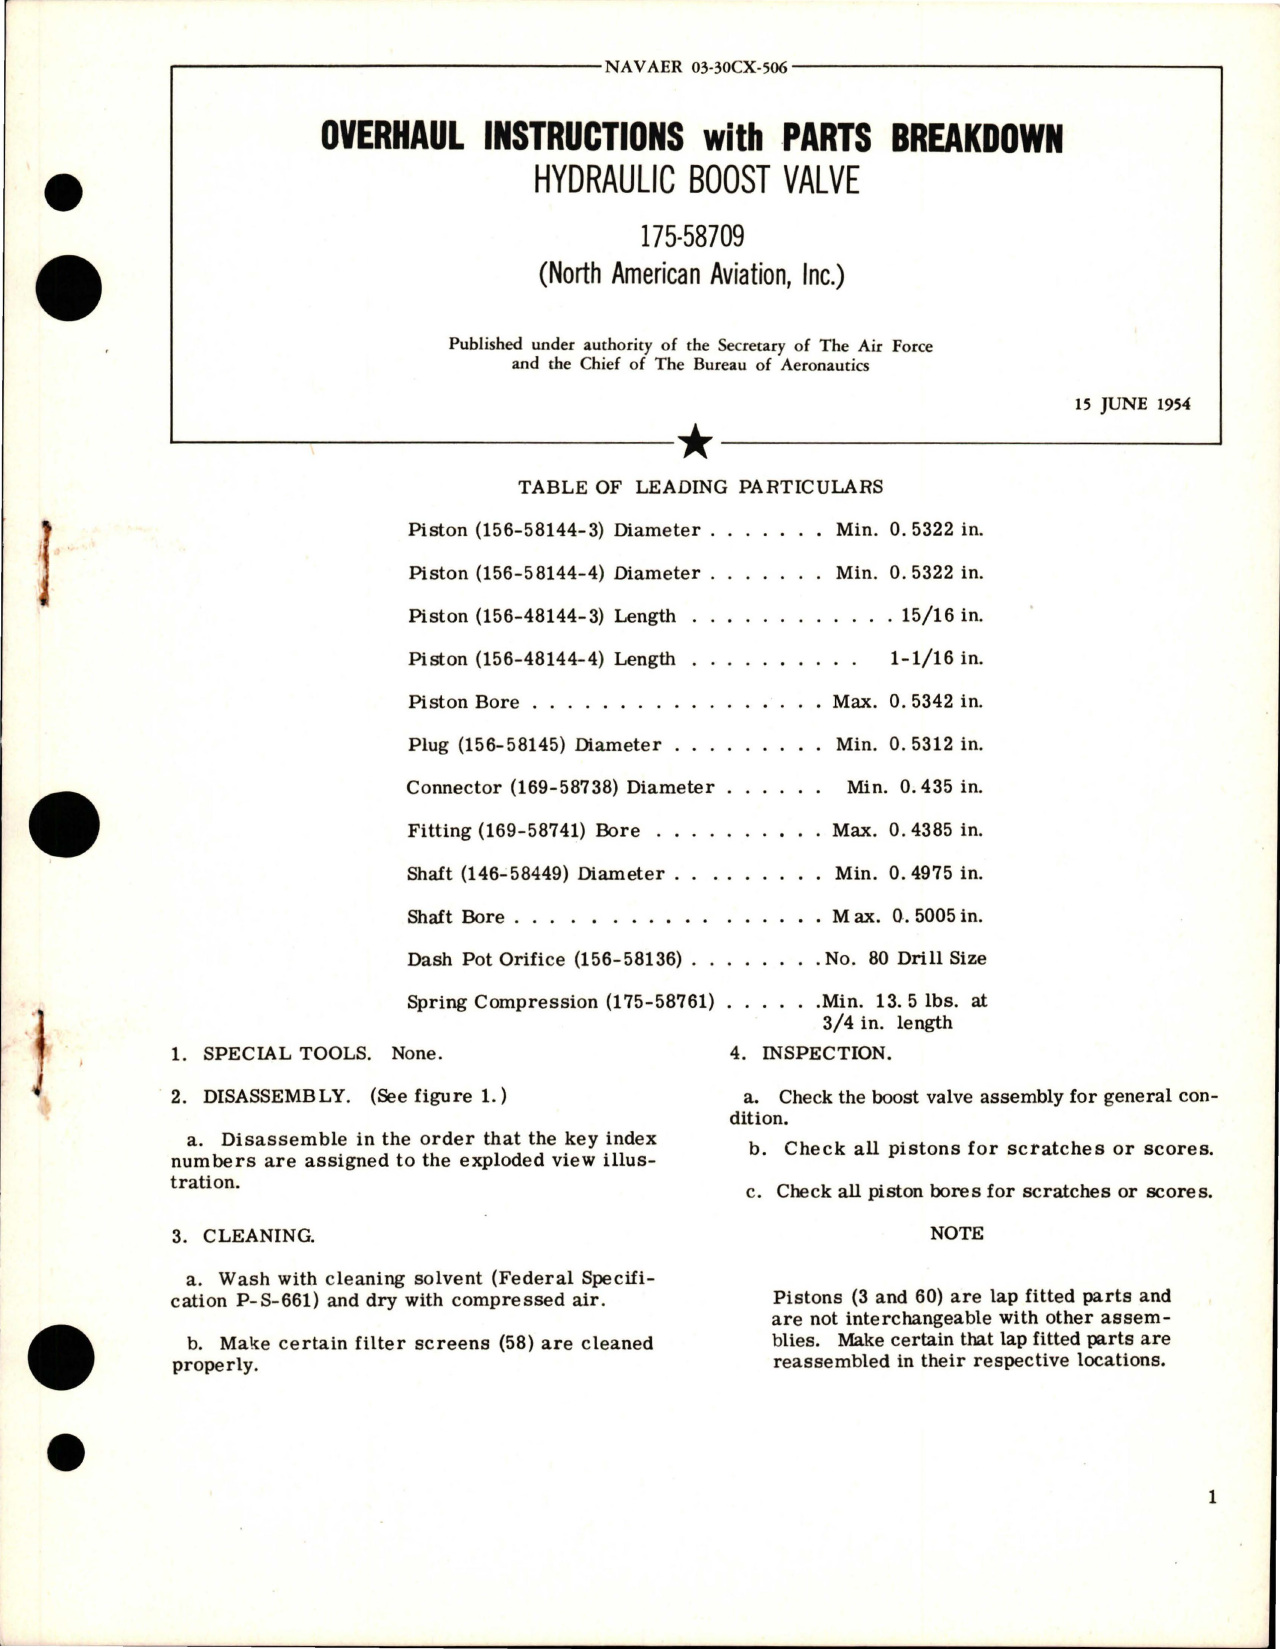 Sample page 1 from AirCorps Library document: Overhaul Instructions with Parts Breakdown for Hydraulic Boost Valve - 175-58709